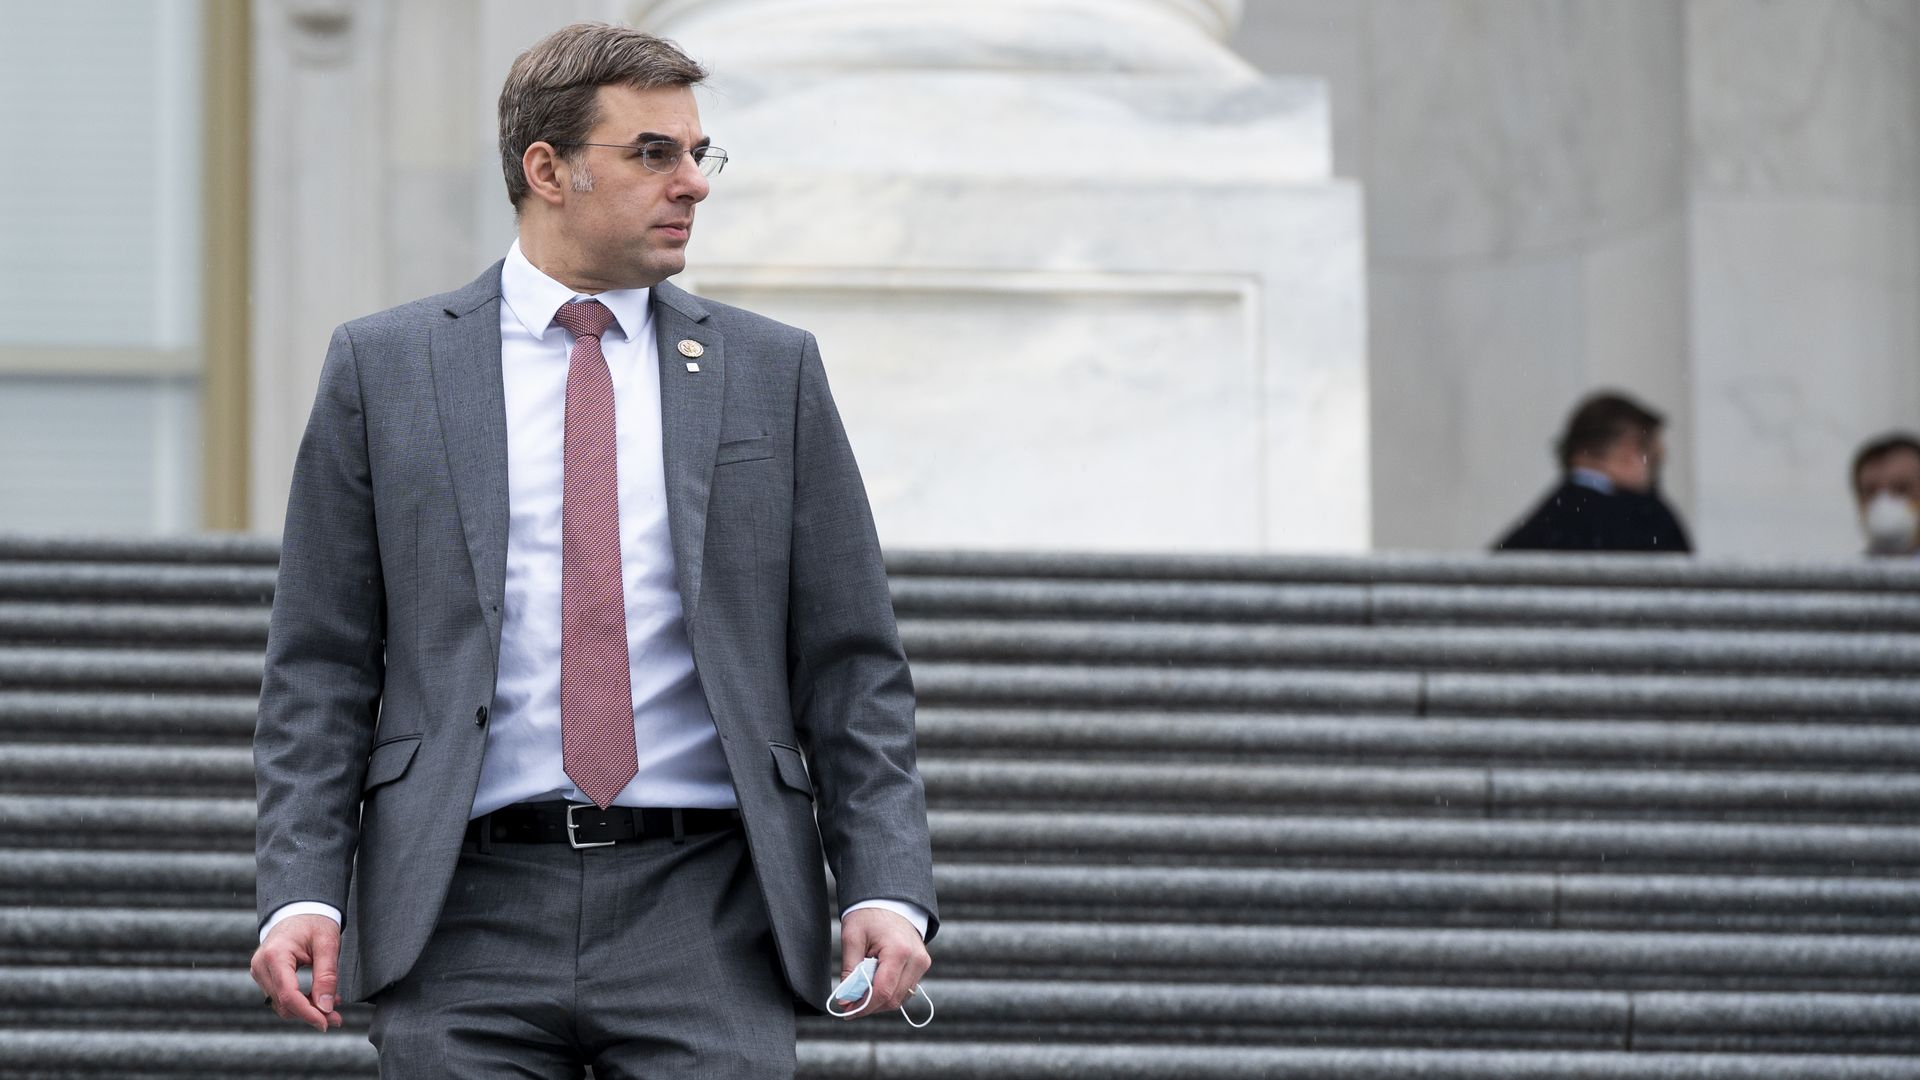 Justin Amash stands at the Capitol in this image